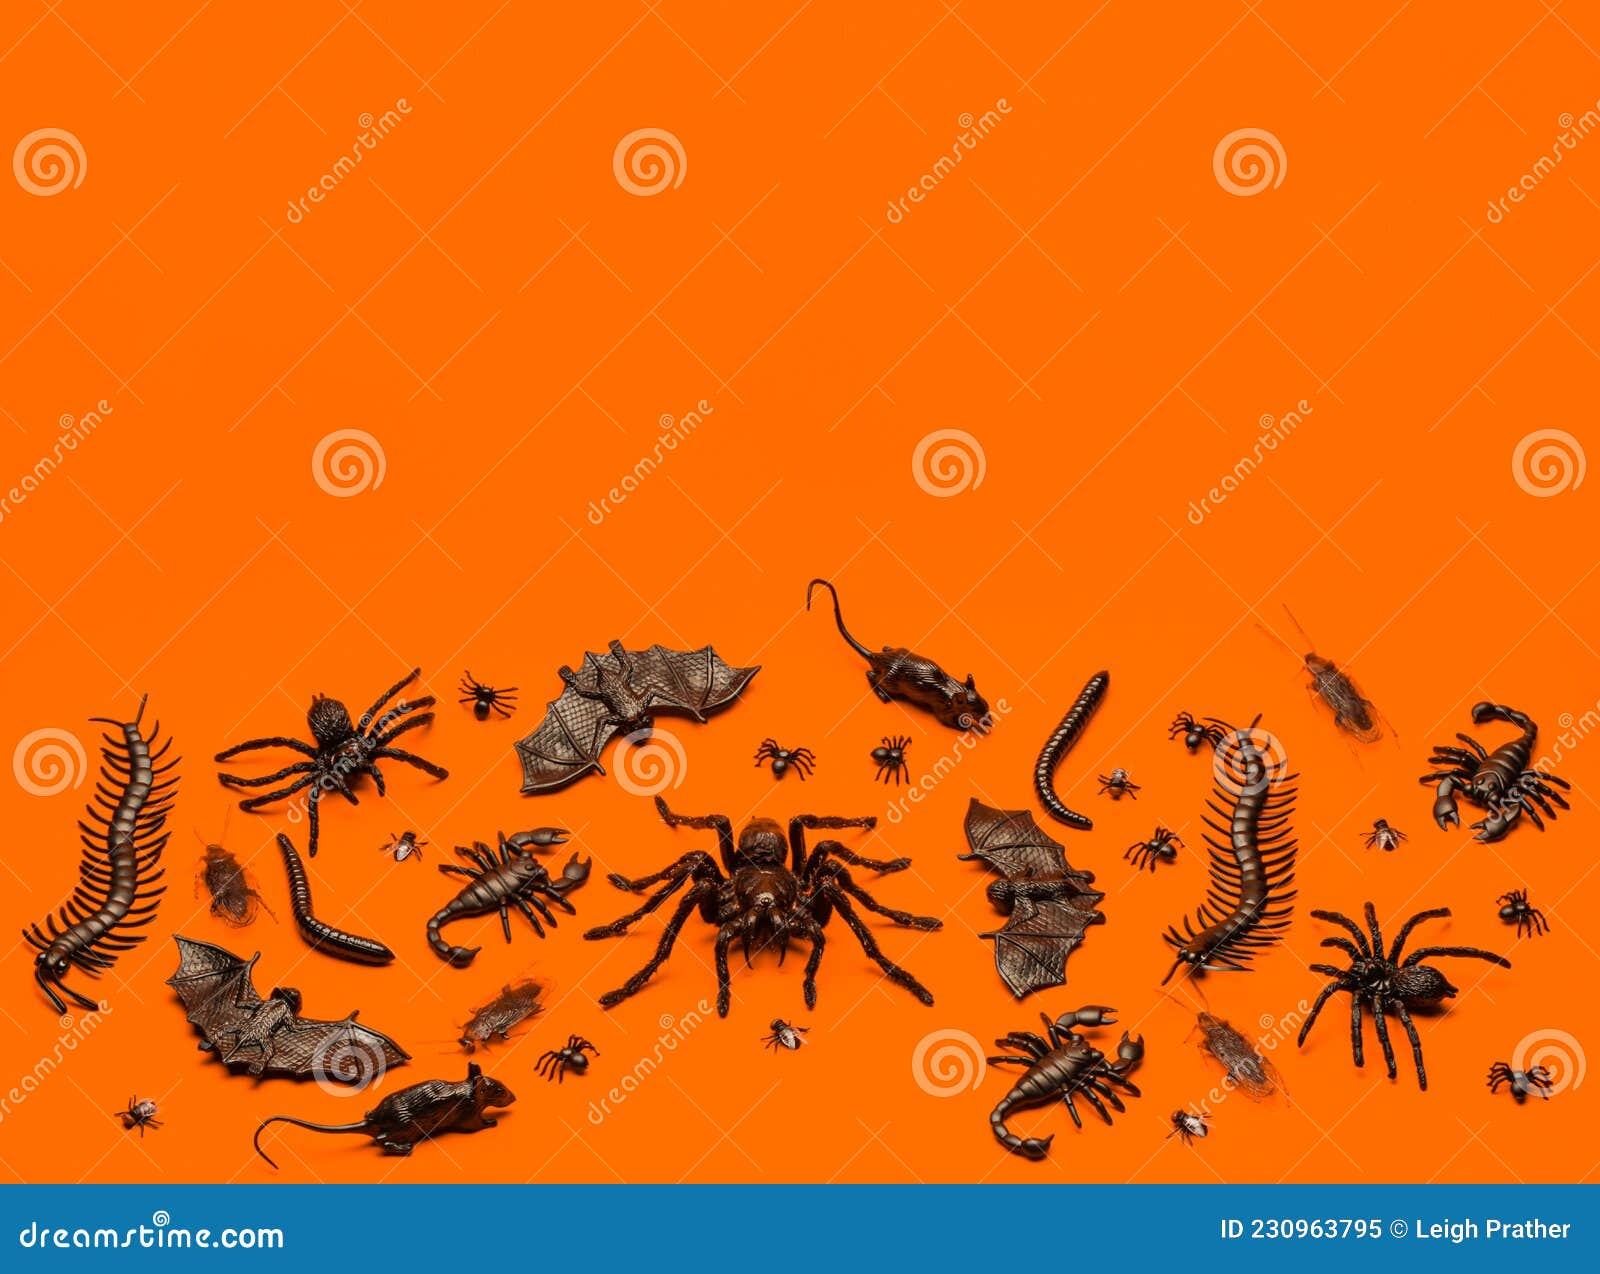 black halloween creepy crawly bugs and spiders on orange background with blank space for text